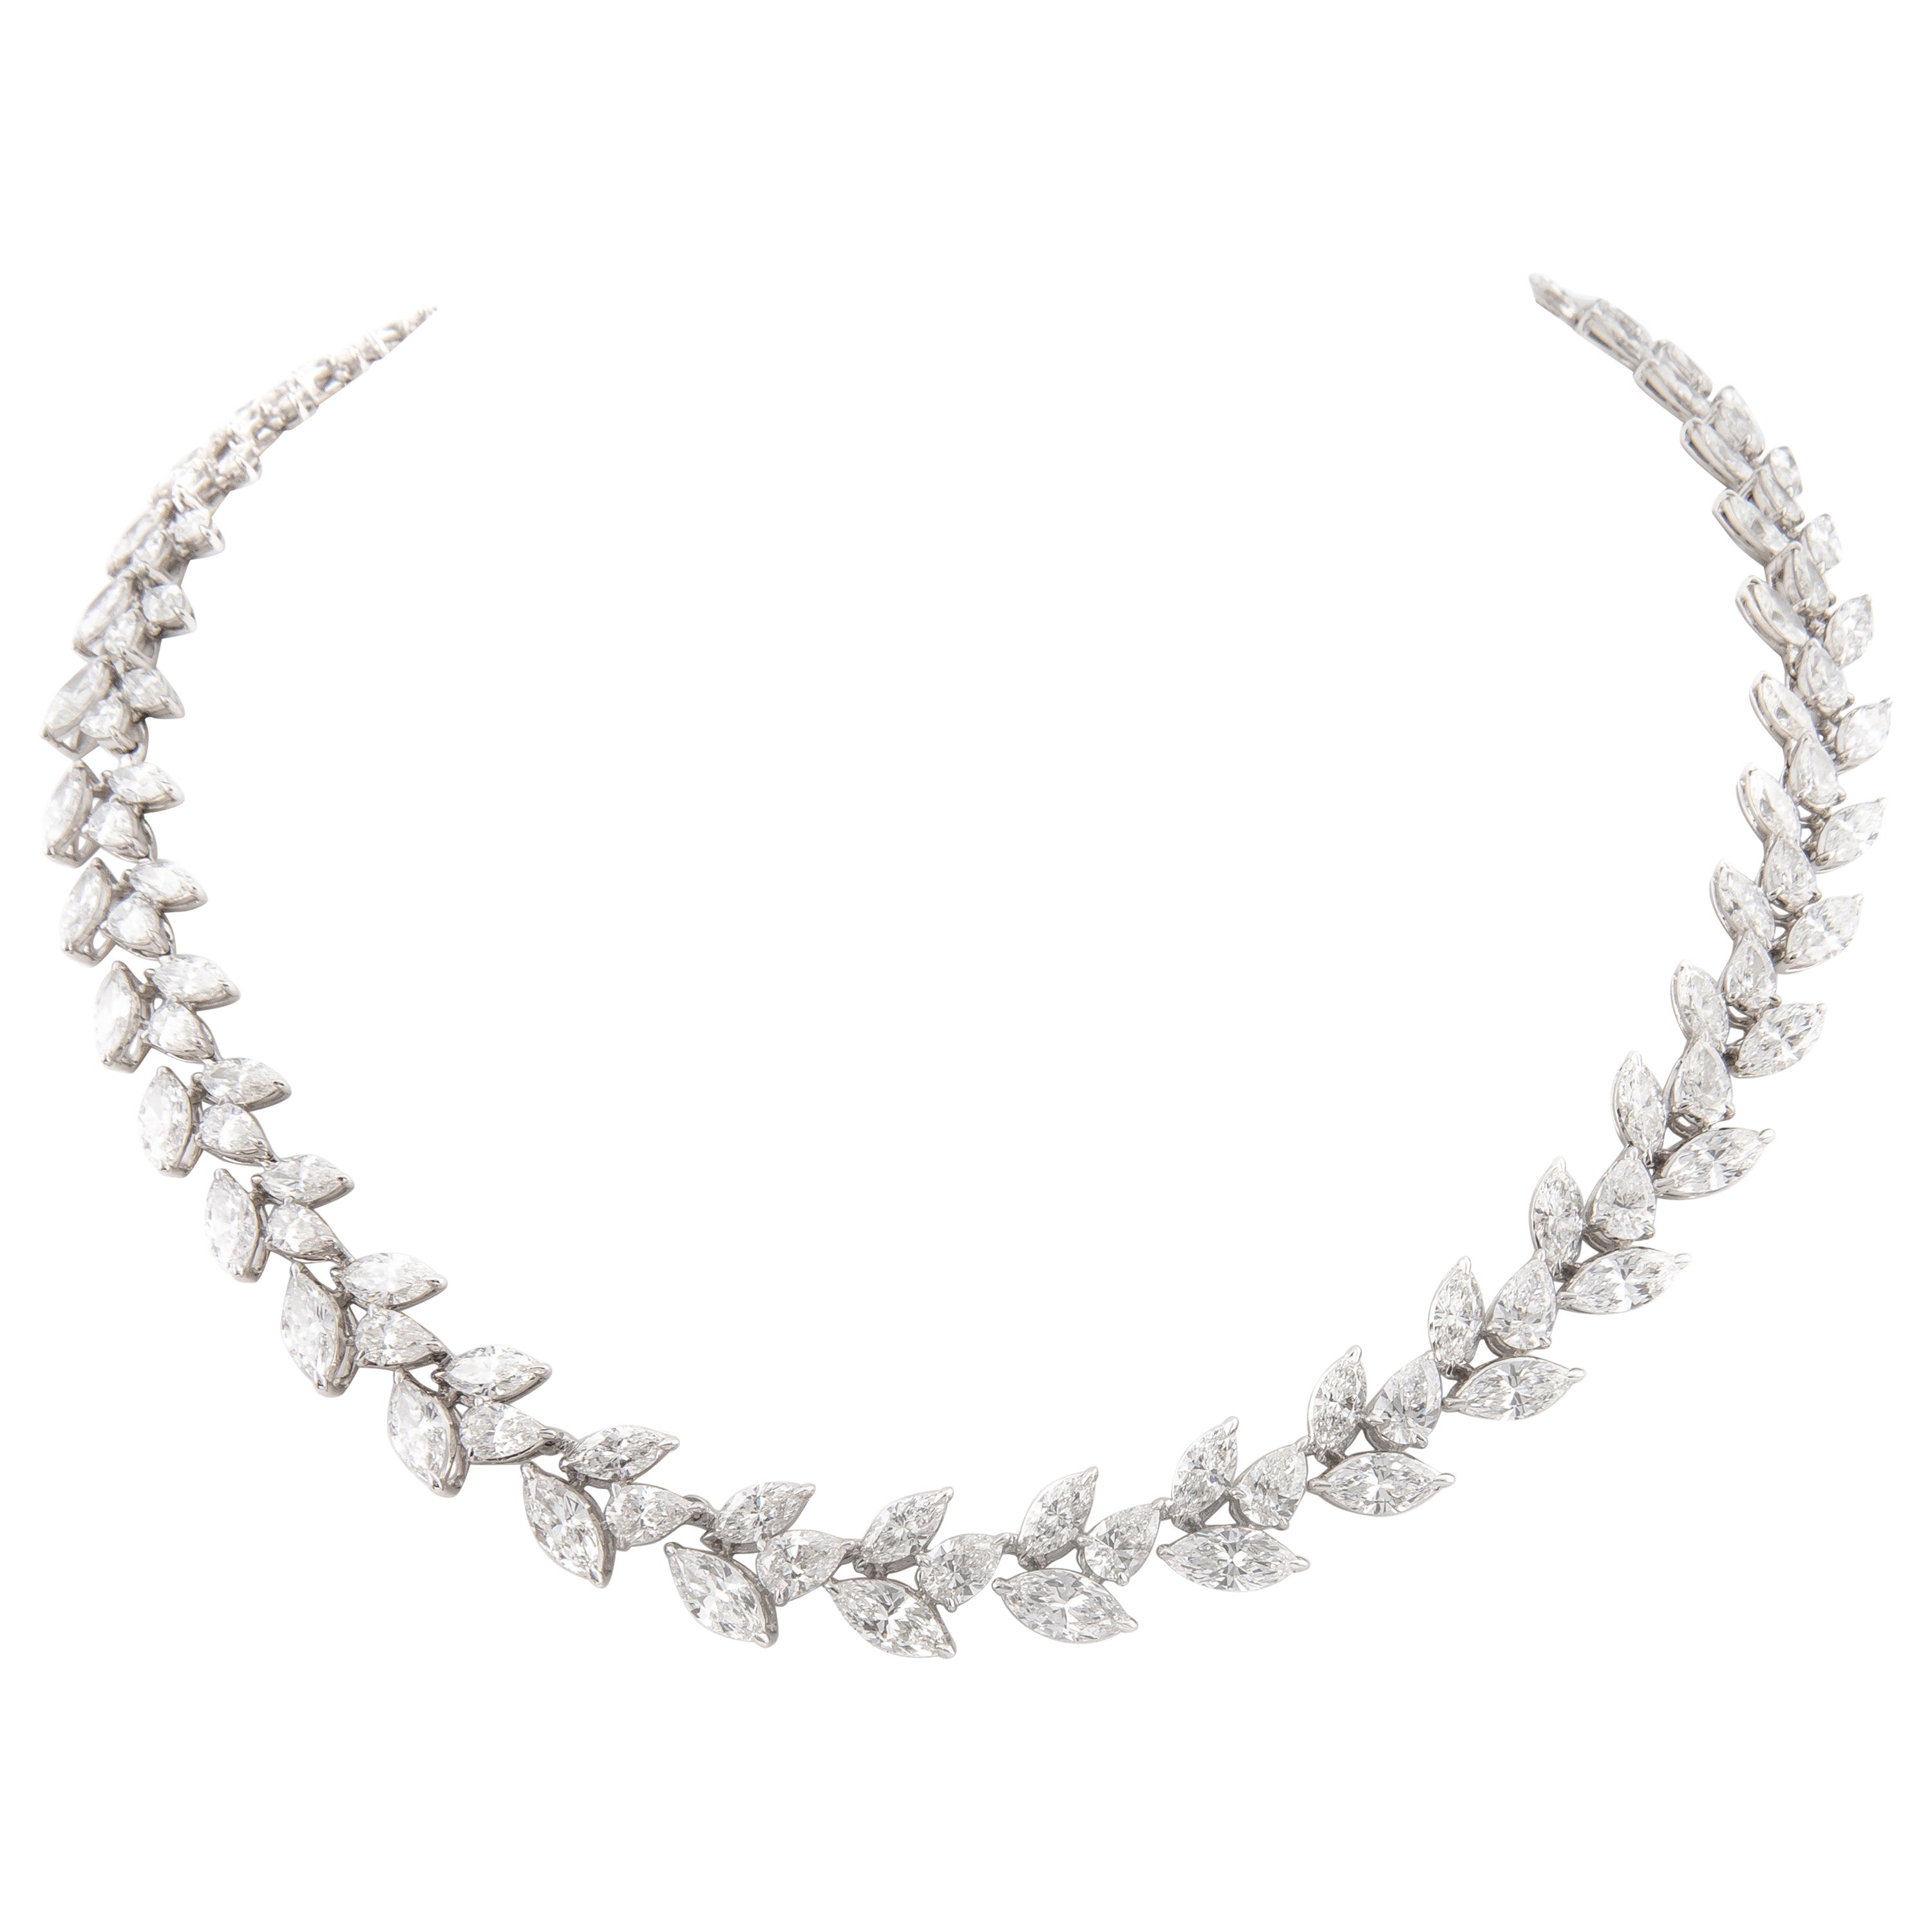 Alexander 45.35ct Marques & Pear Cut Diamond Necklace 18k White Gold For Sale